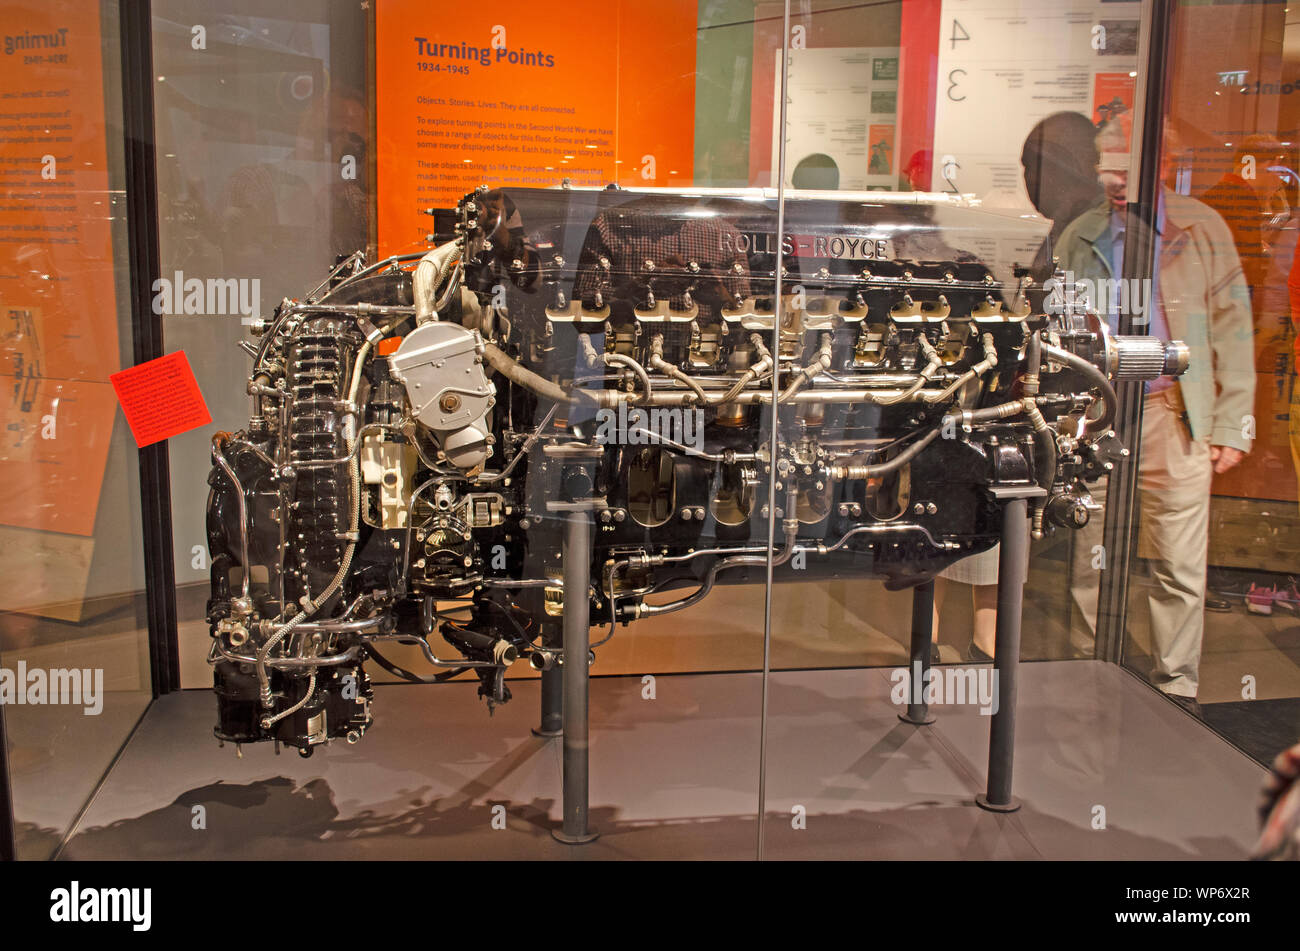 Rolls Royce Merlin 25 engine. 12-cylinder, upright 60-degree Vee, liquid-cooled, poppet-valve, two-speed single-stage supercharged. Trafford Park buil Stock Photo